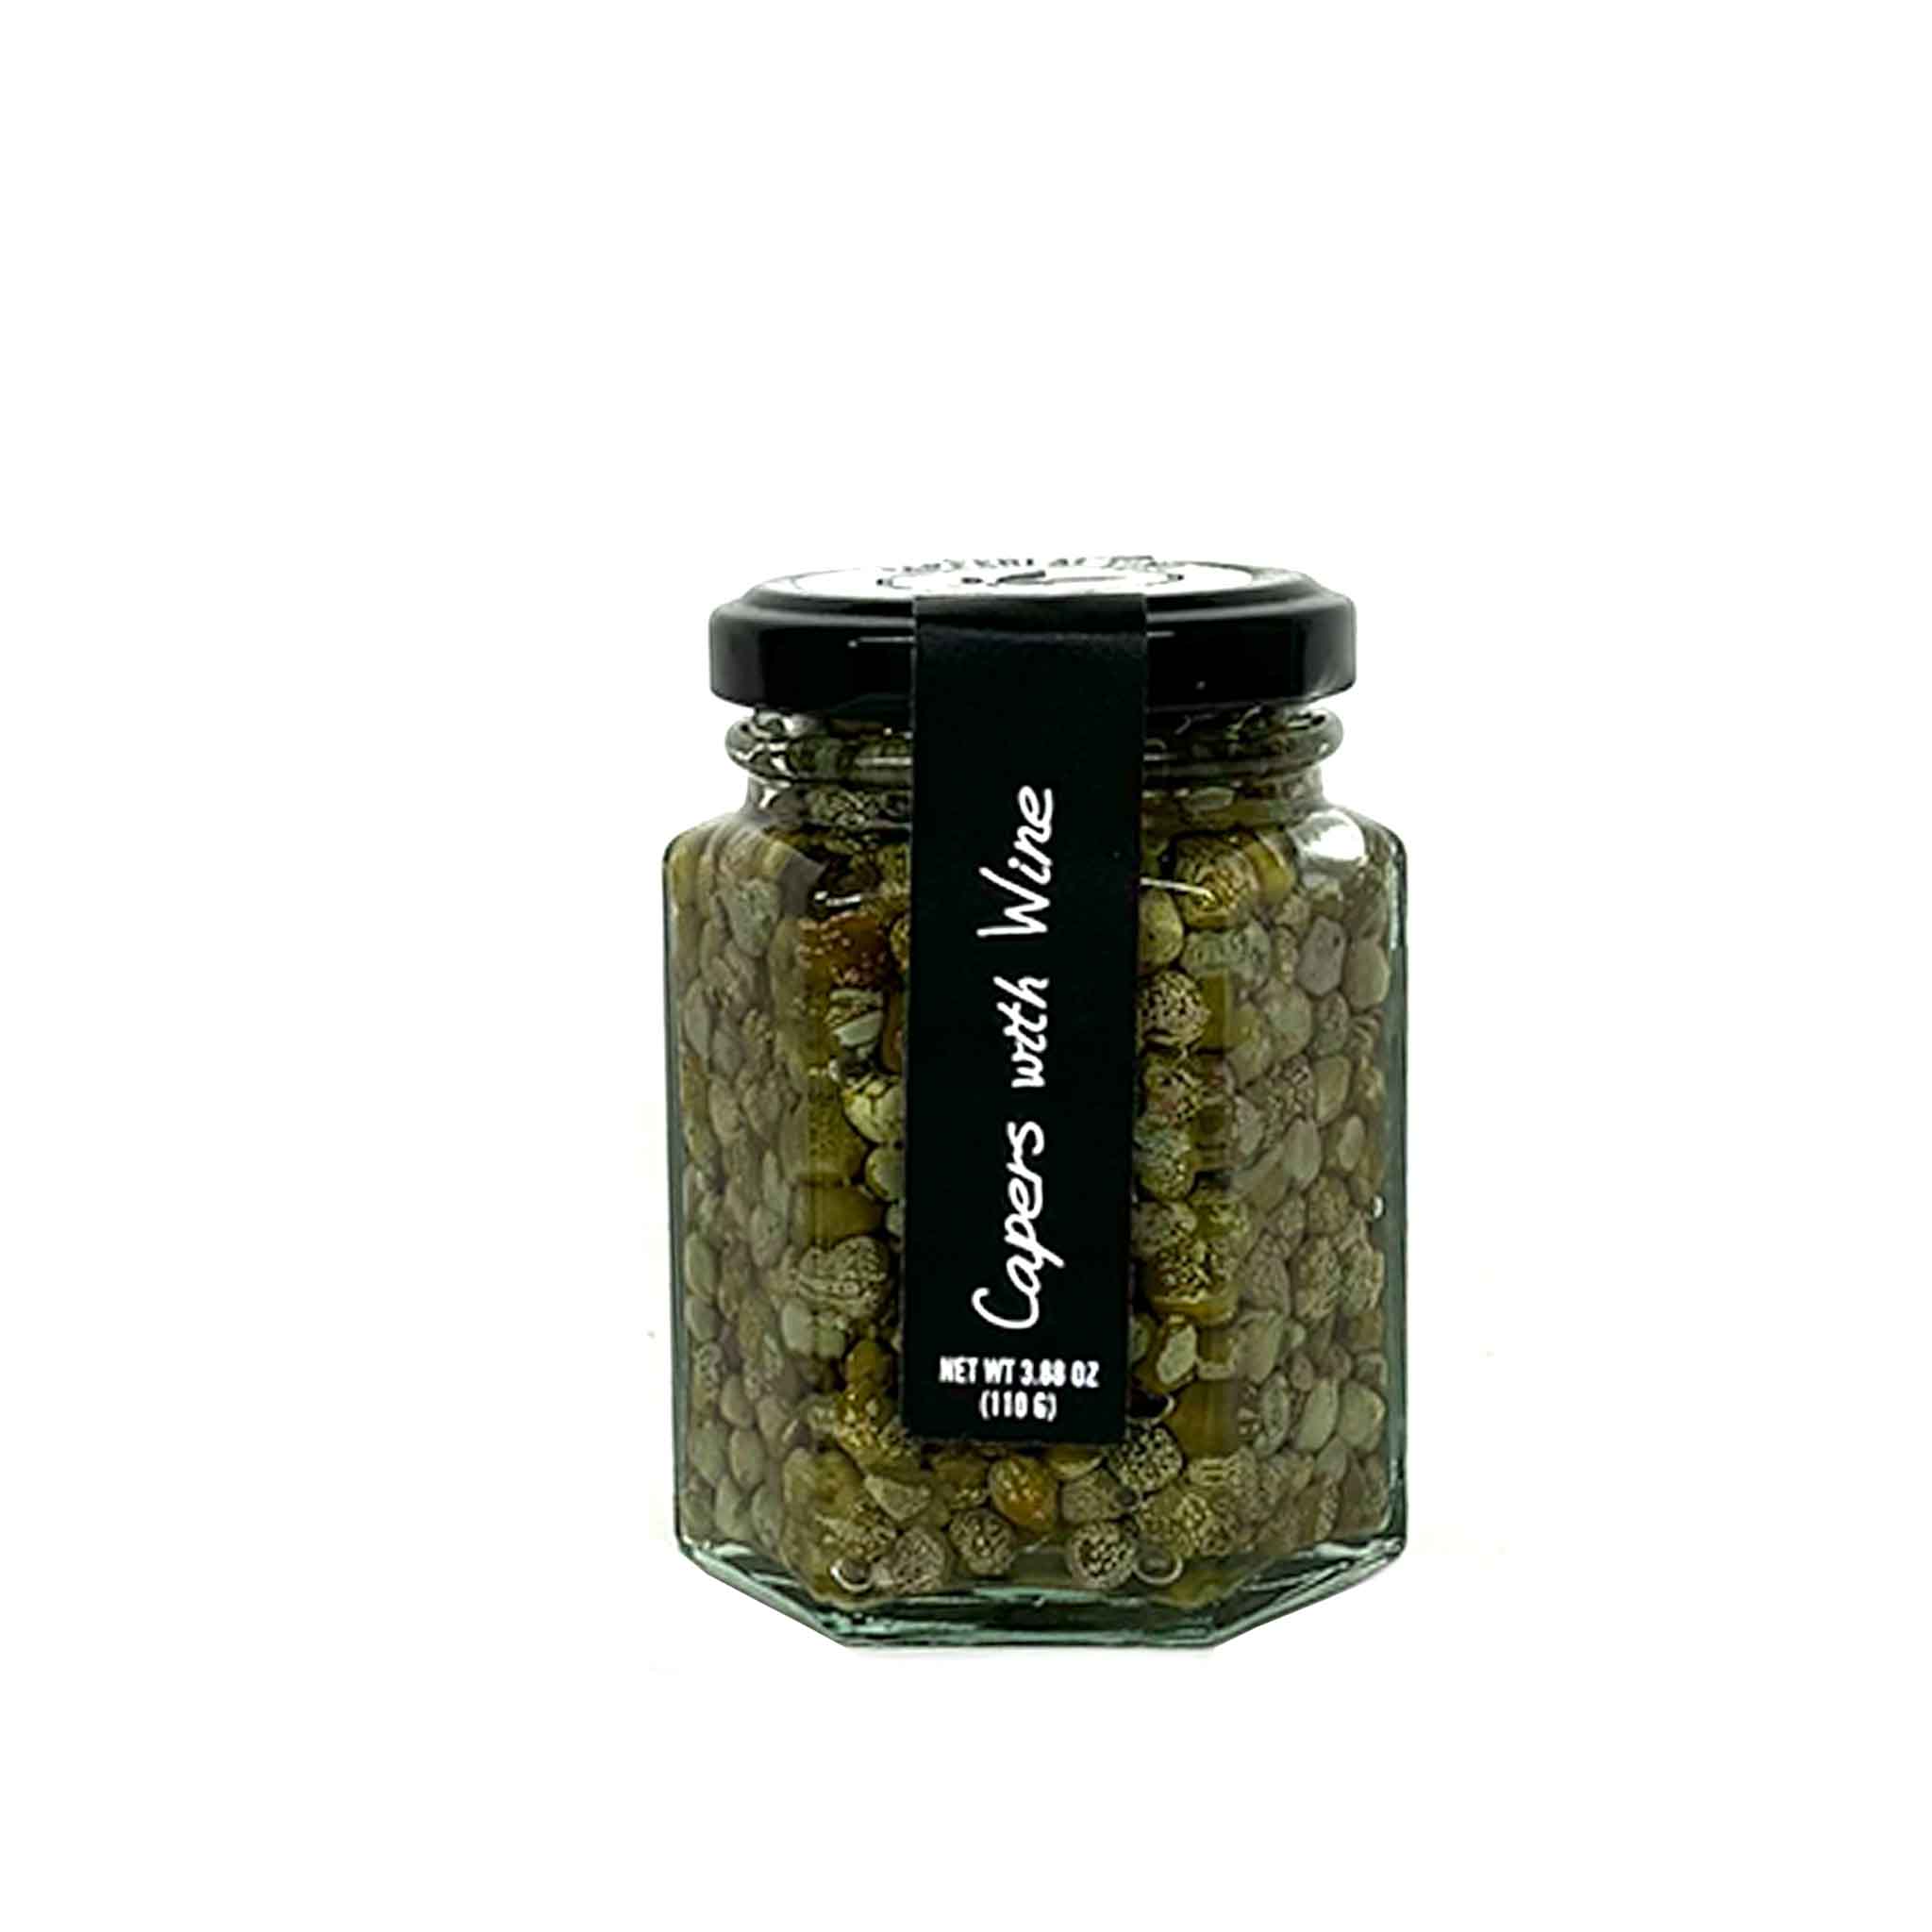 CASINA ROSSA CAPERS WITH WINE 110g